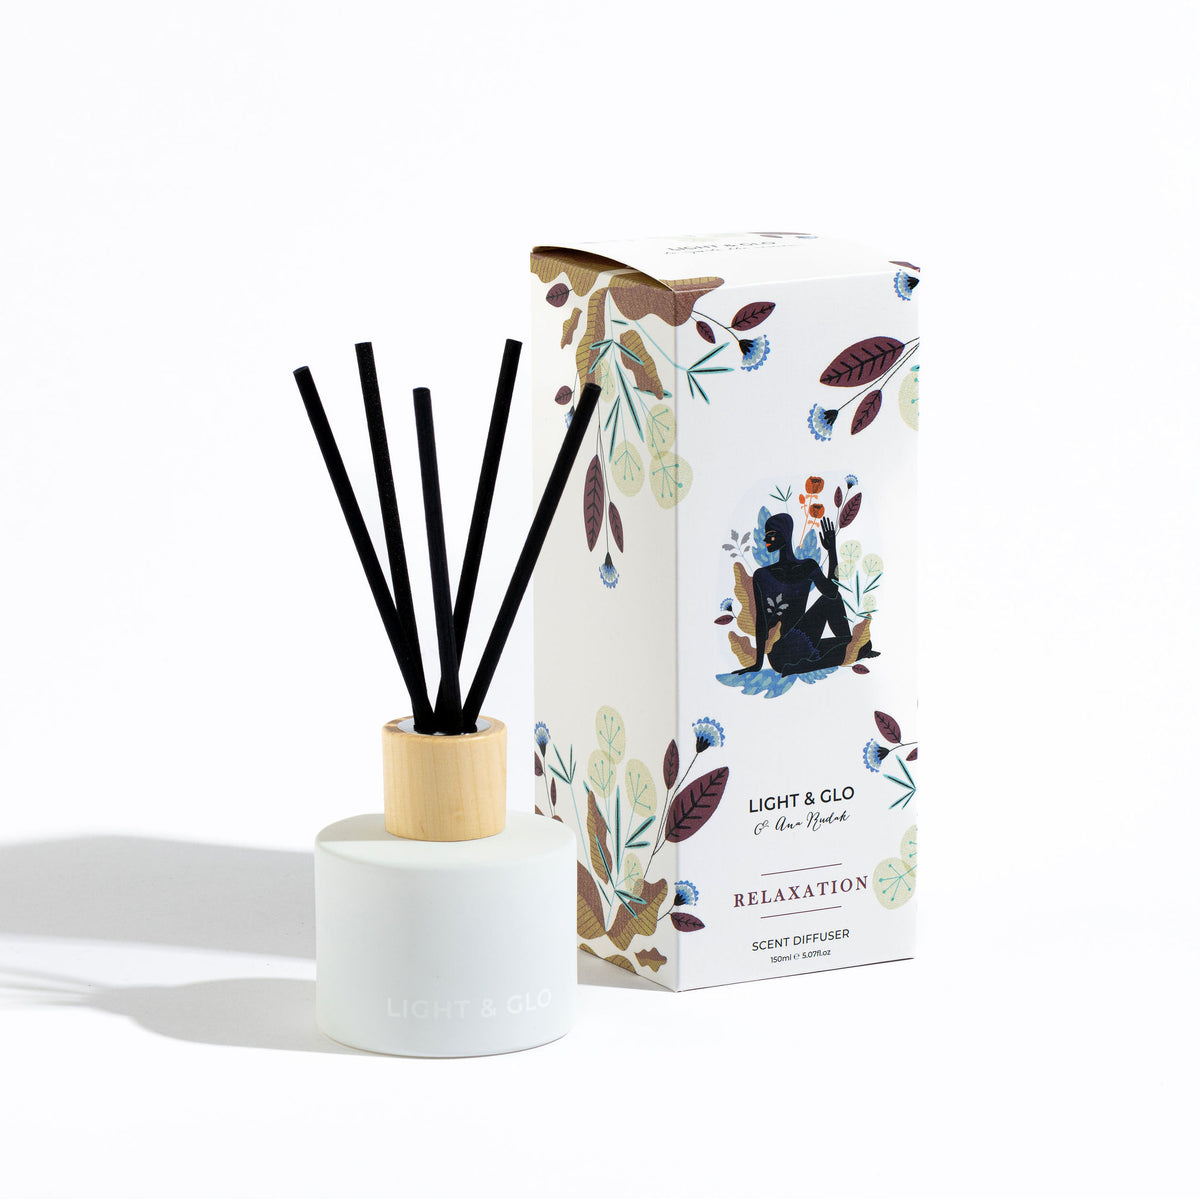 Relaxation - Asana Scent Diffuser | Luxury Candles &amp; Home Fragrances by Light + Glo